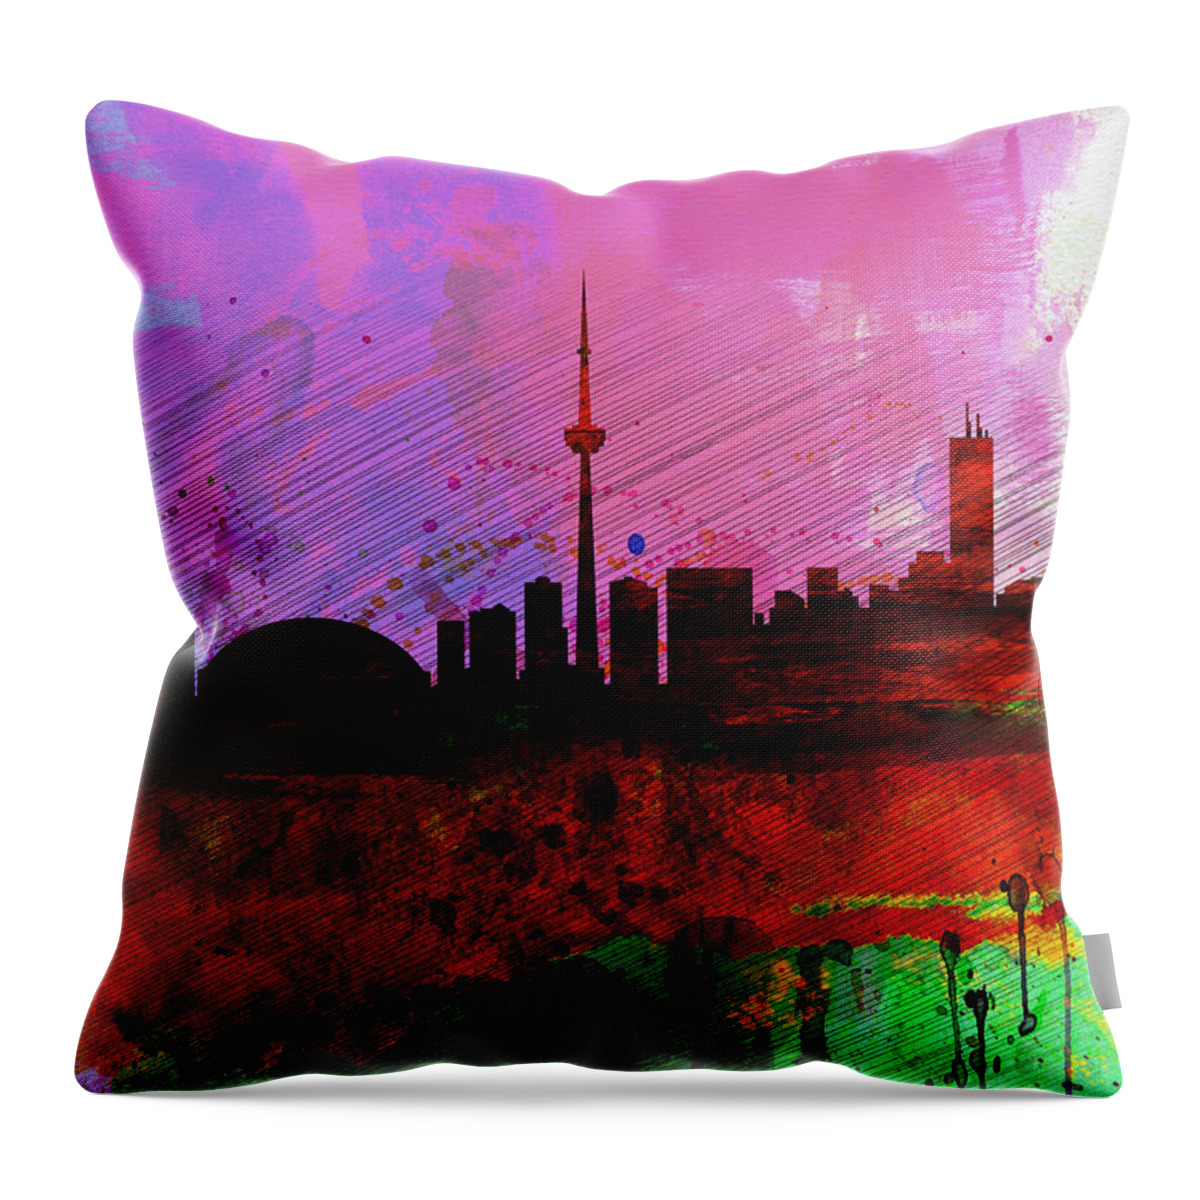  Throw Pillow featuring the painting Toronto Watercolor Skyline by Naxart Studio